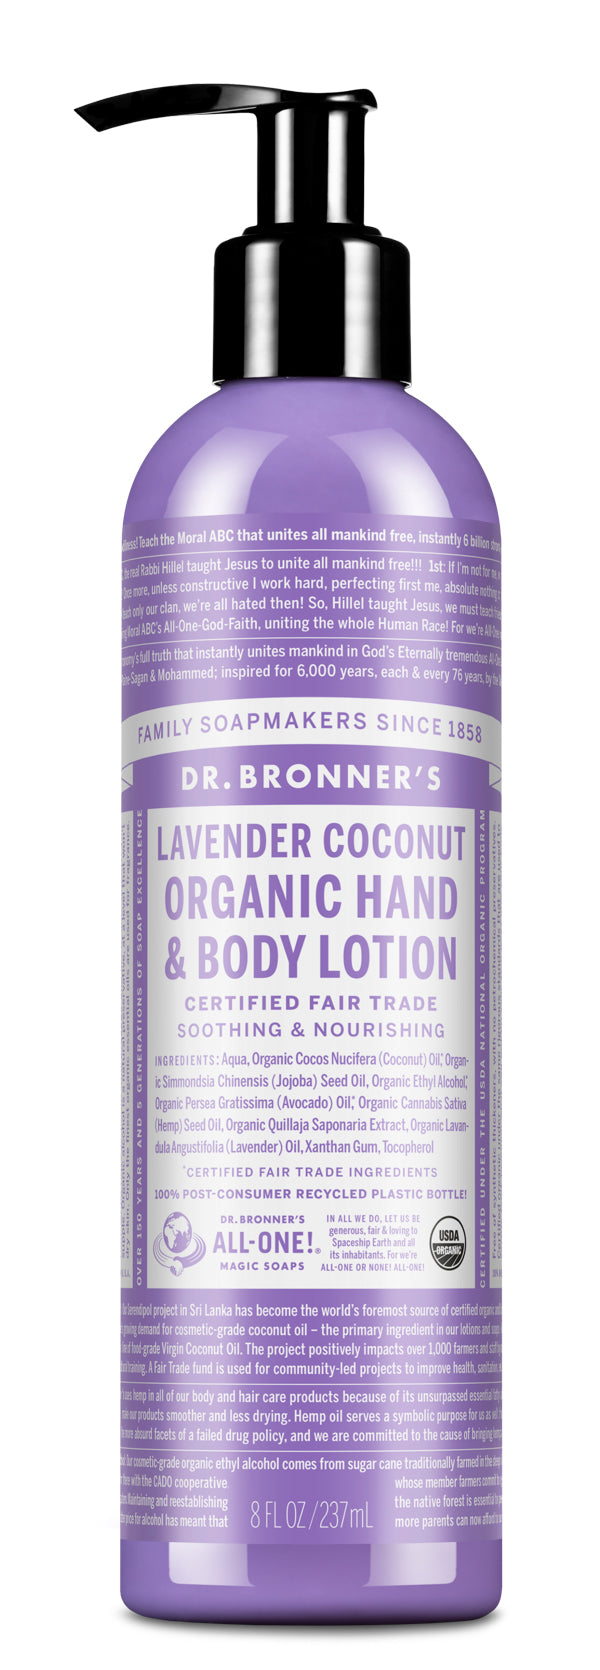 Dr. Bronner’s Lavender Coconut Organic Hand & Body Lotion